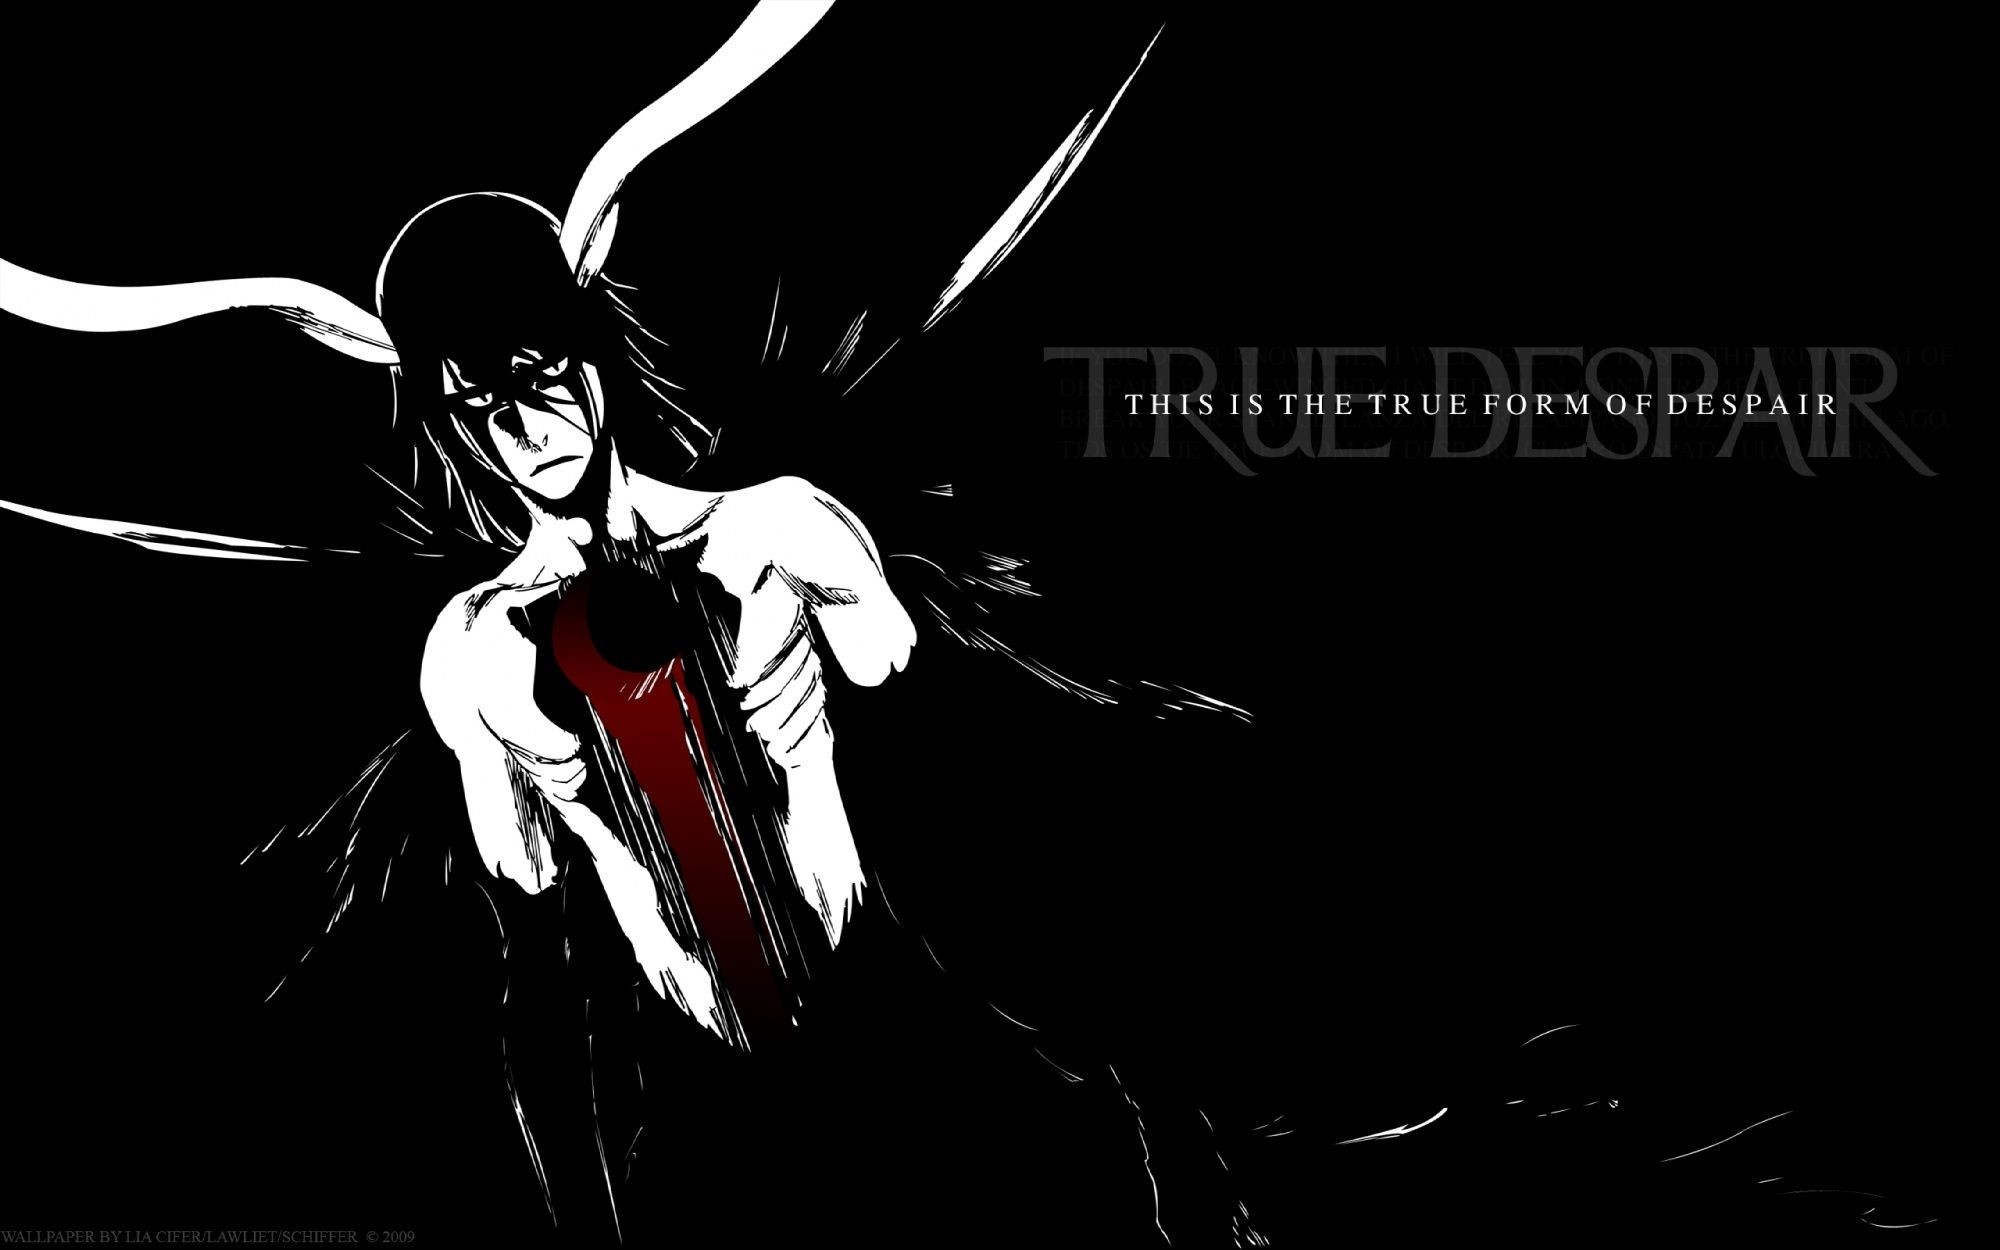 Bleach Ulquiorra Hd Quality Wallpapers For Free 2000x1250 0 116 Mb 2000x1250